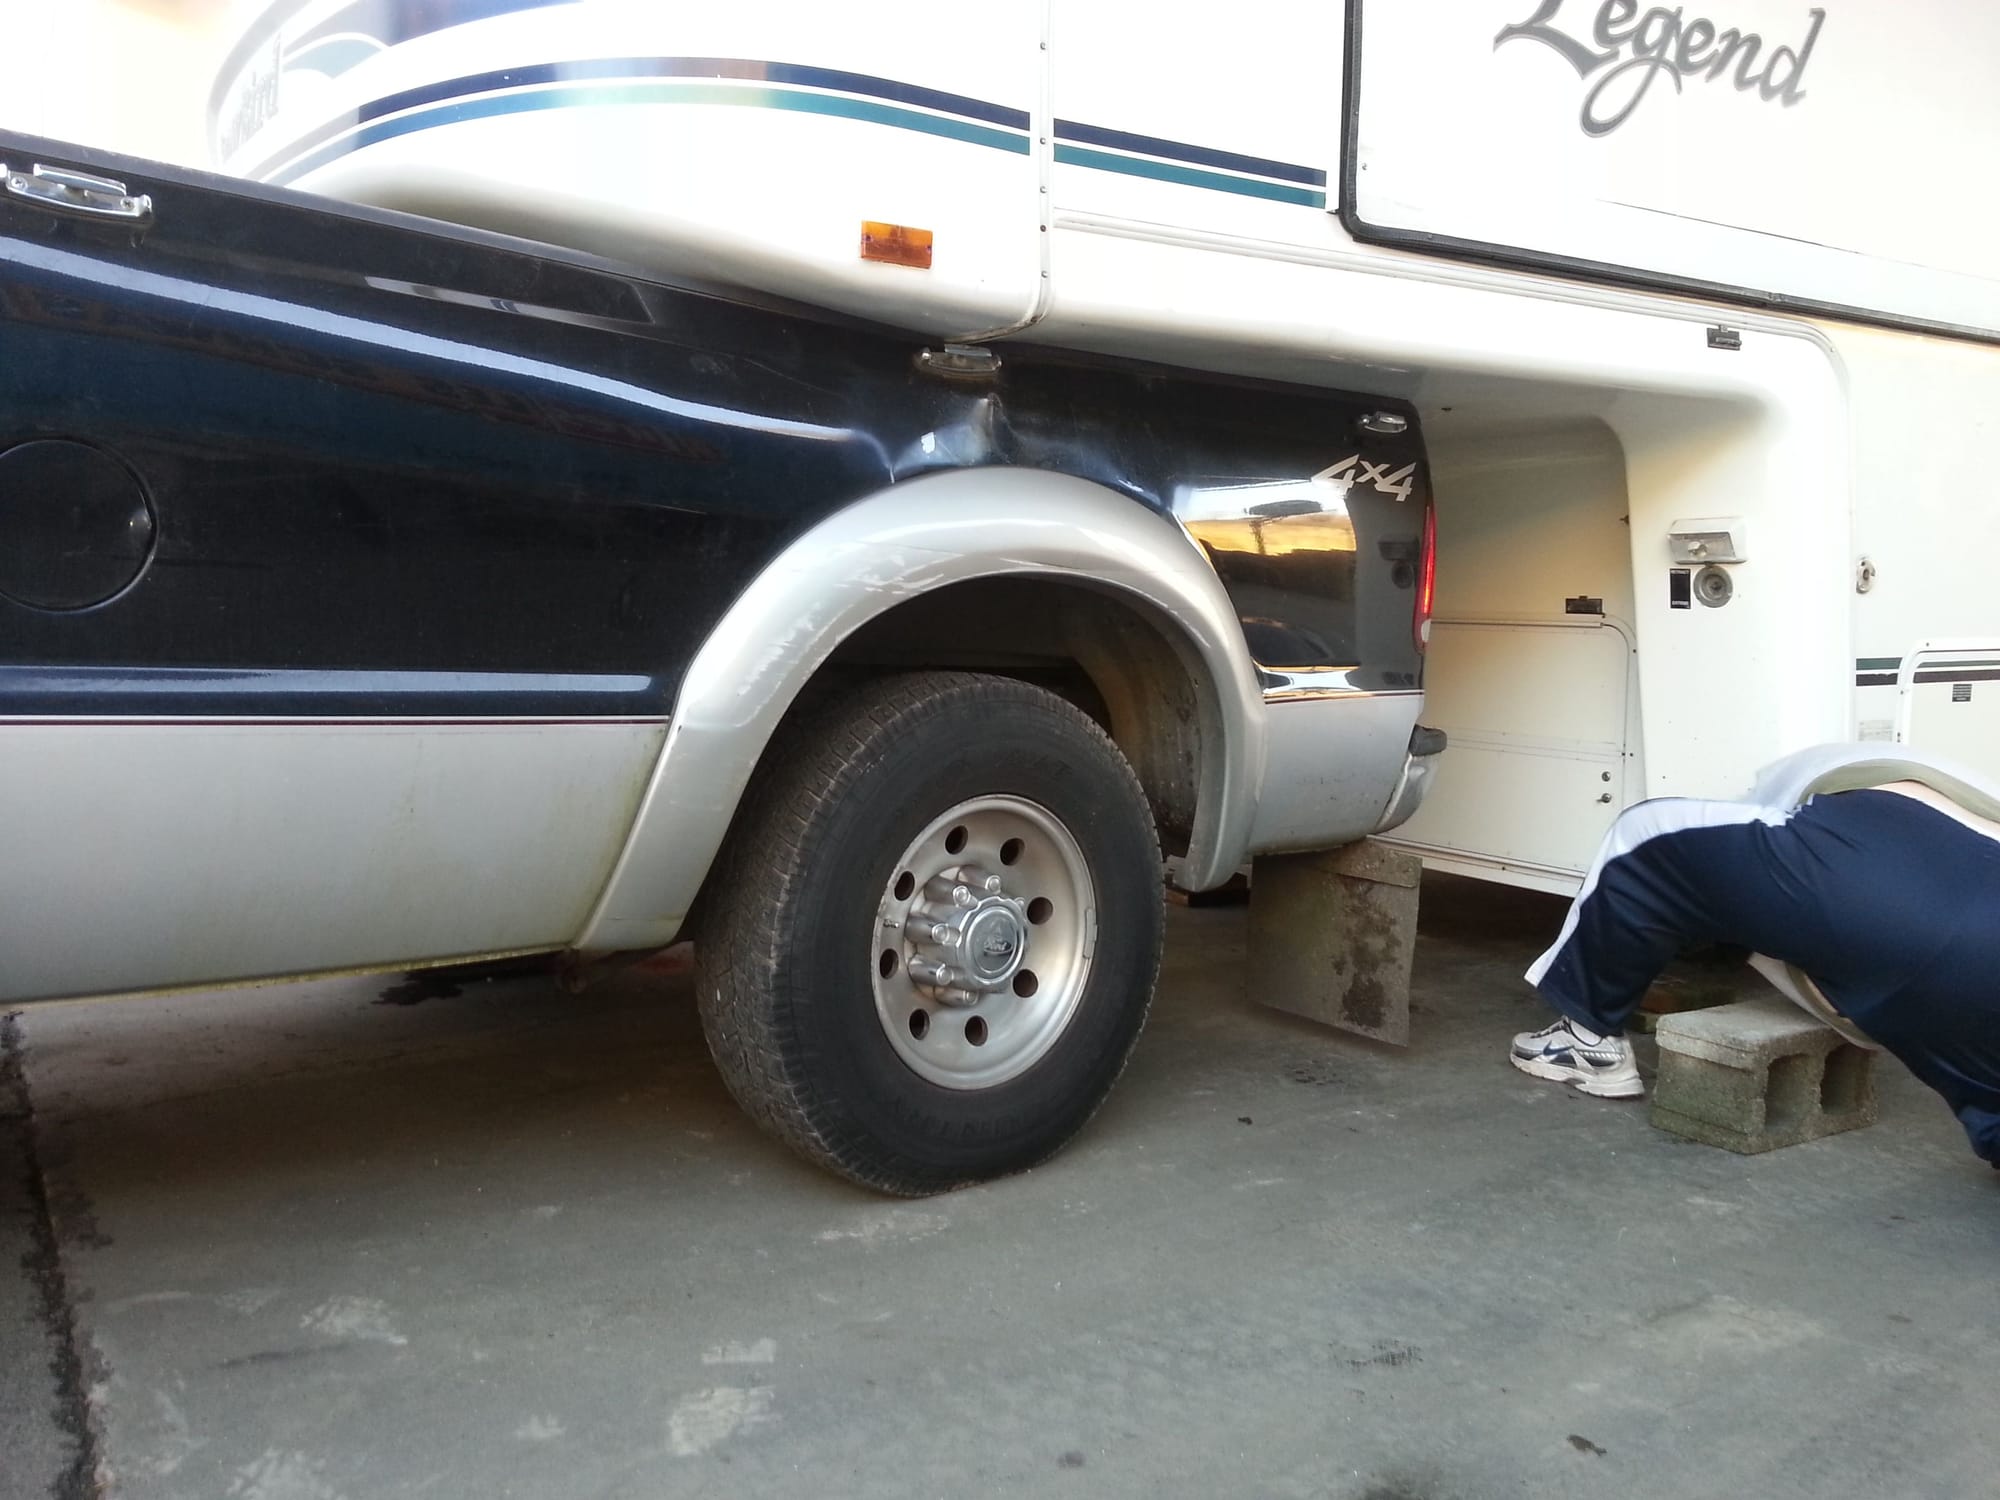 So my 5th wheel came off the hitch... What happened? - Ford F150 Forum